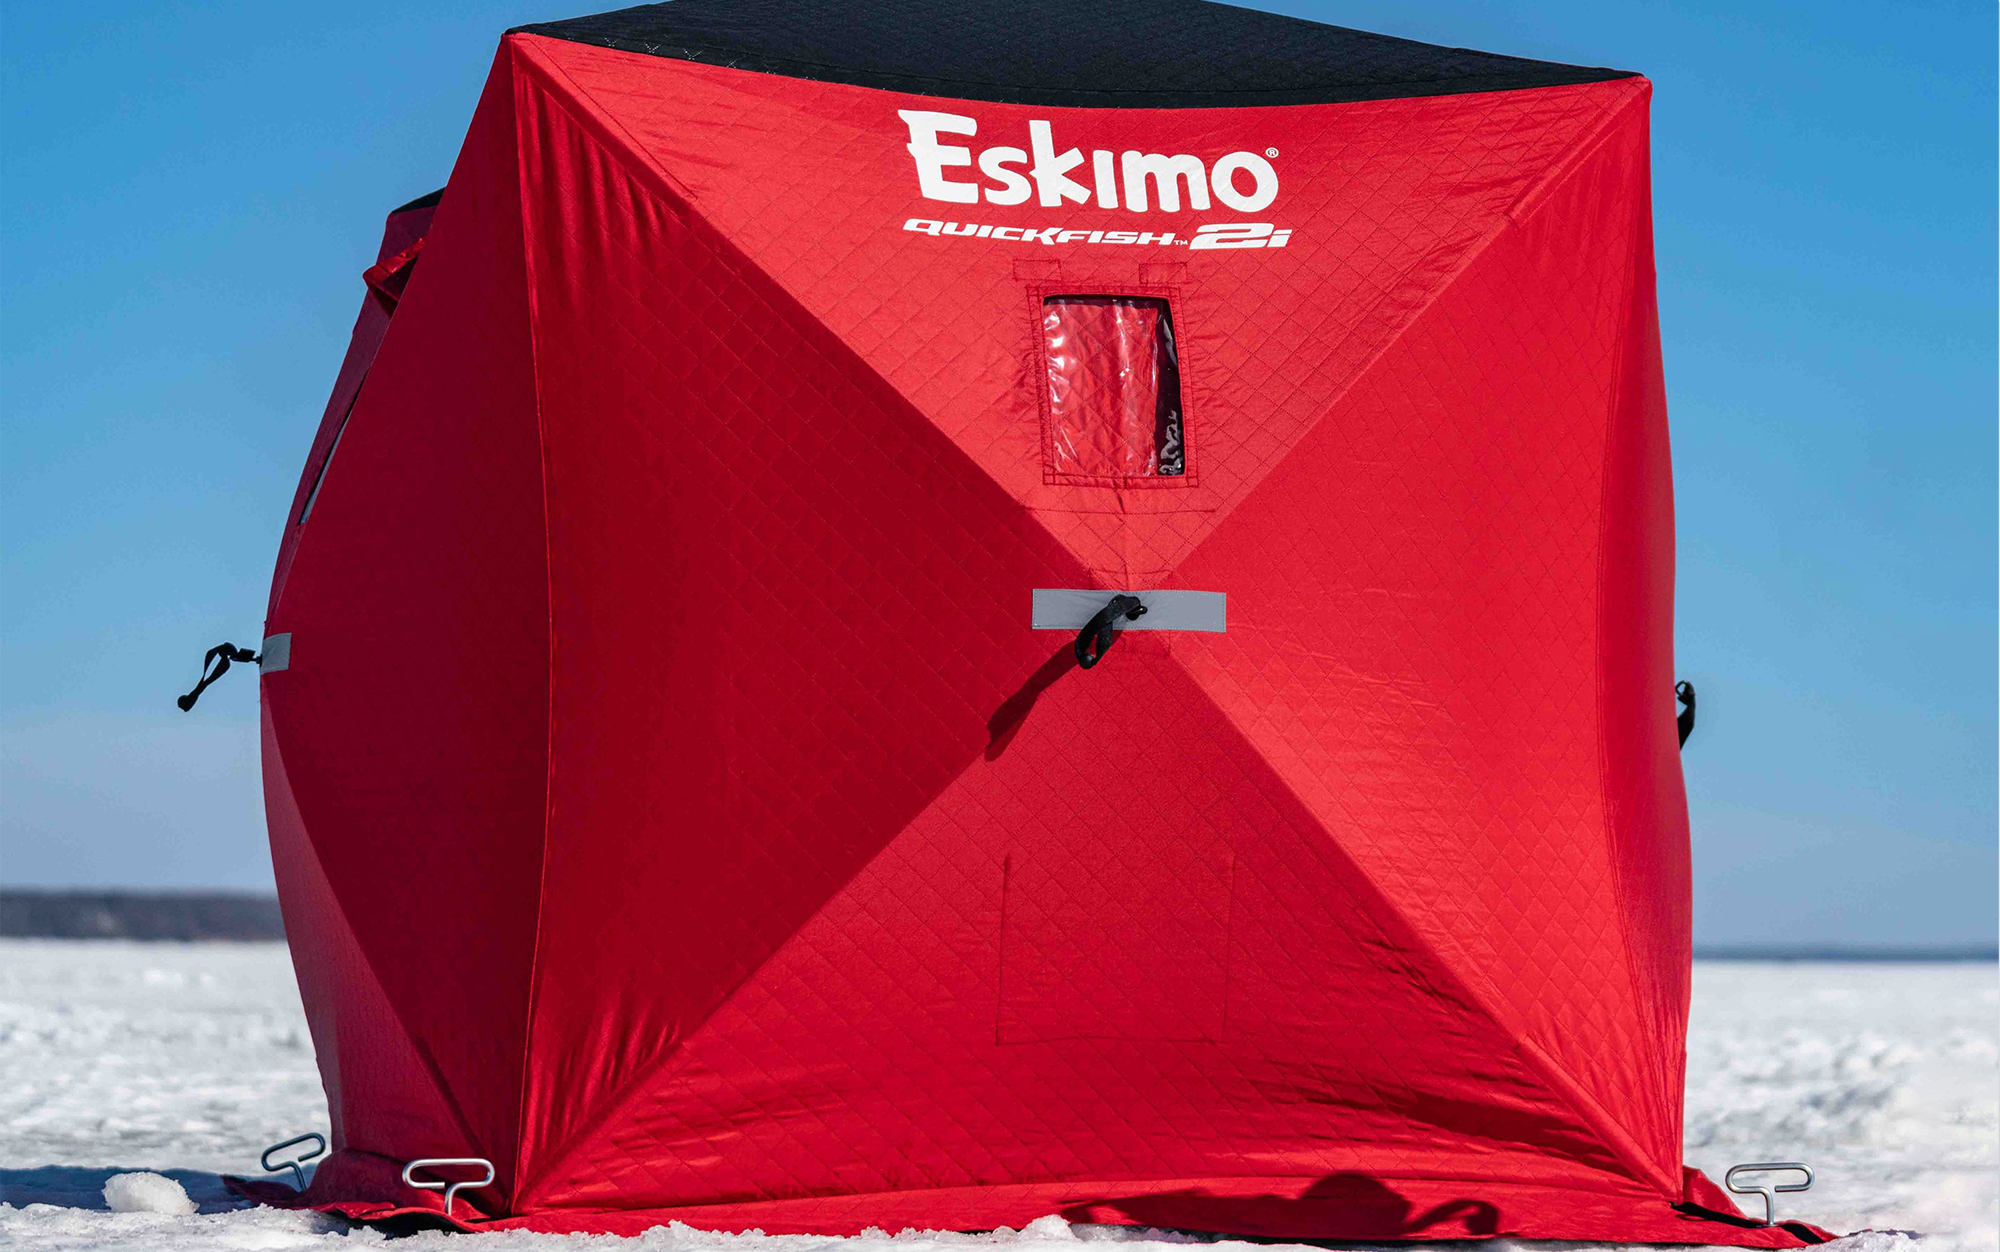 EVER SLEEP IN A POP UP SHELTER? - Ice Fishing Forum - Ice Fishing Forum